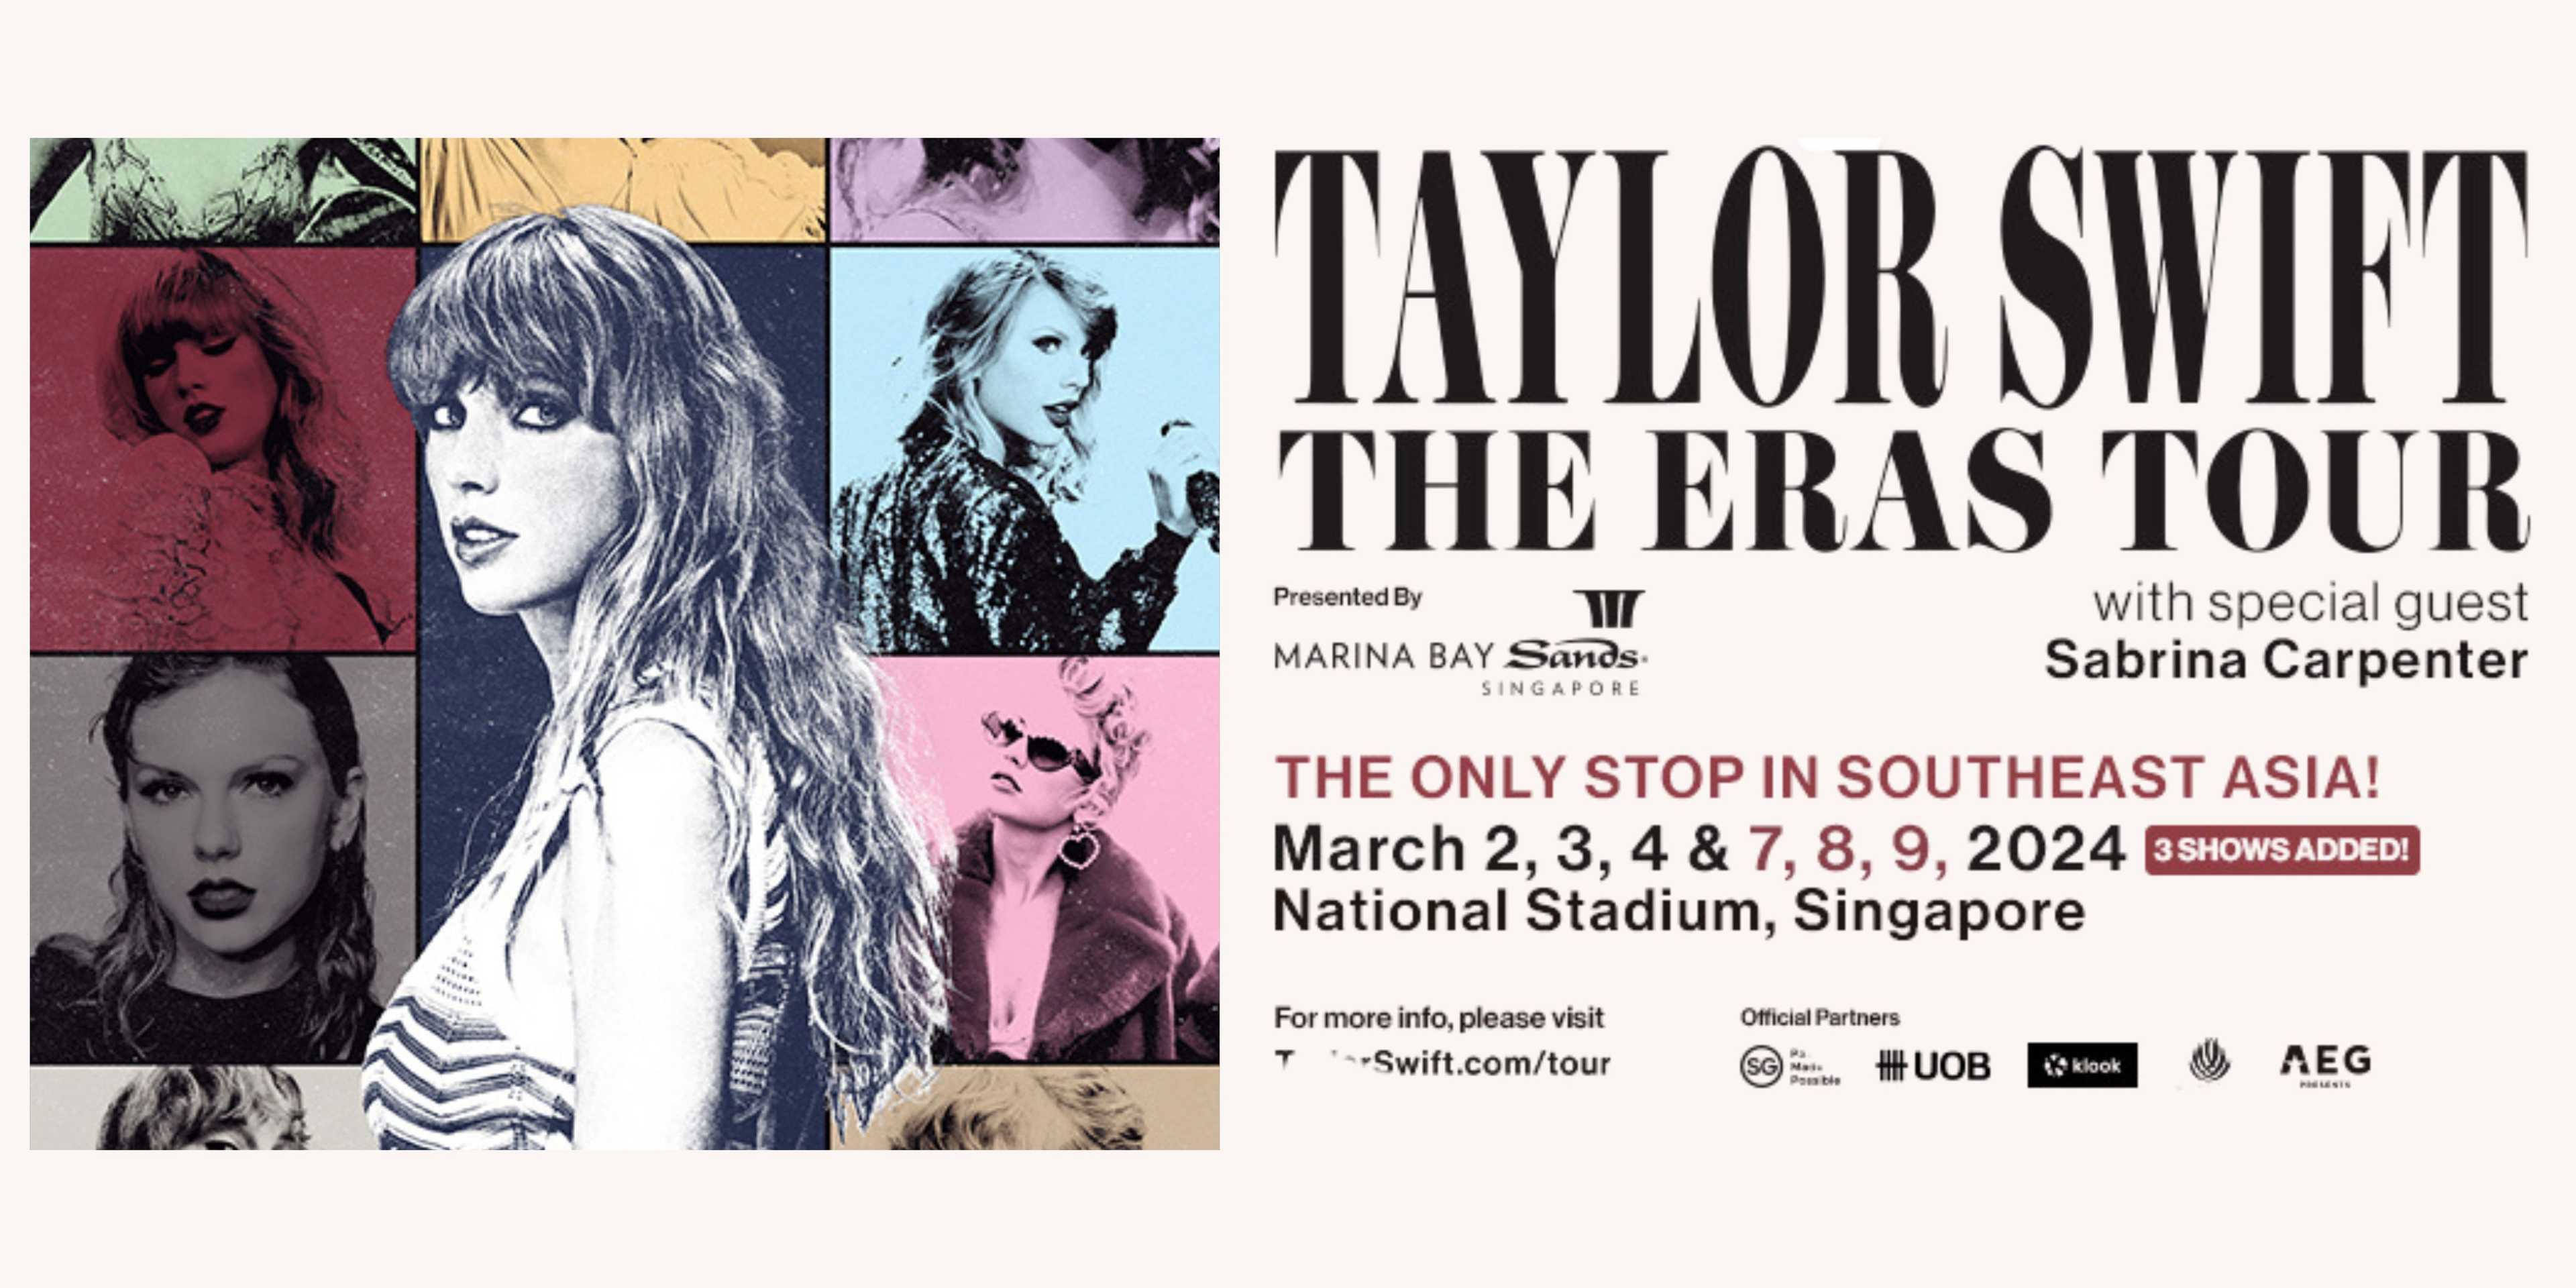 Taylor Swift extends The Eras tour with 3 additional shows in Singapore